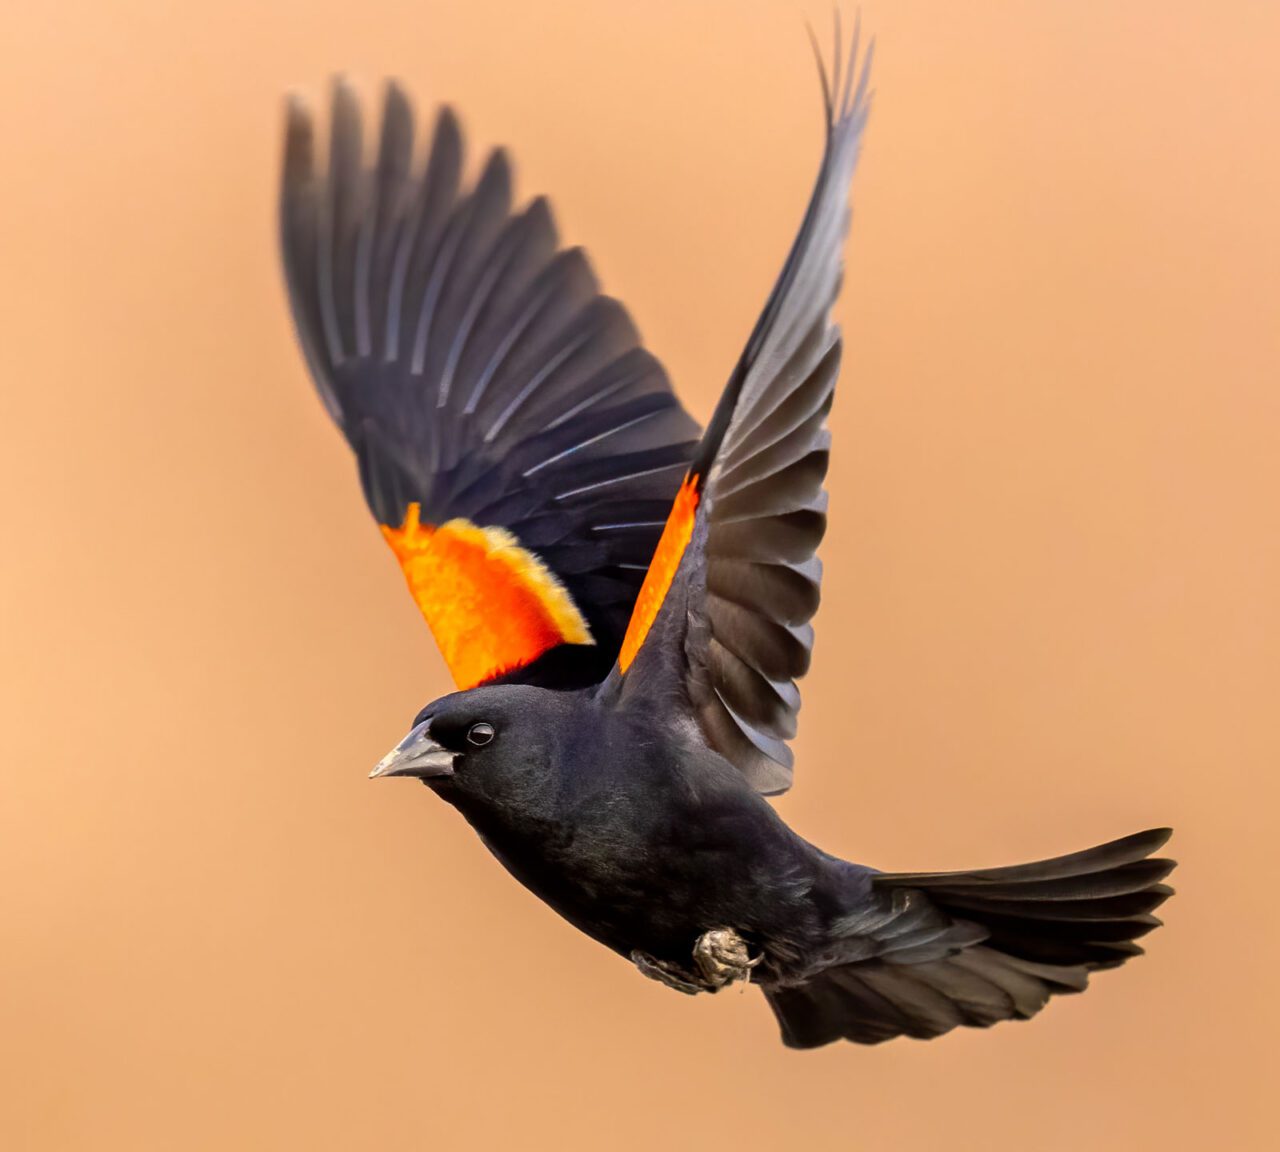 A flying black bird with red and yellow patches on wings.